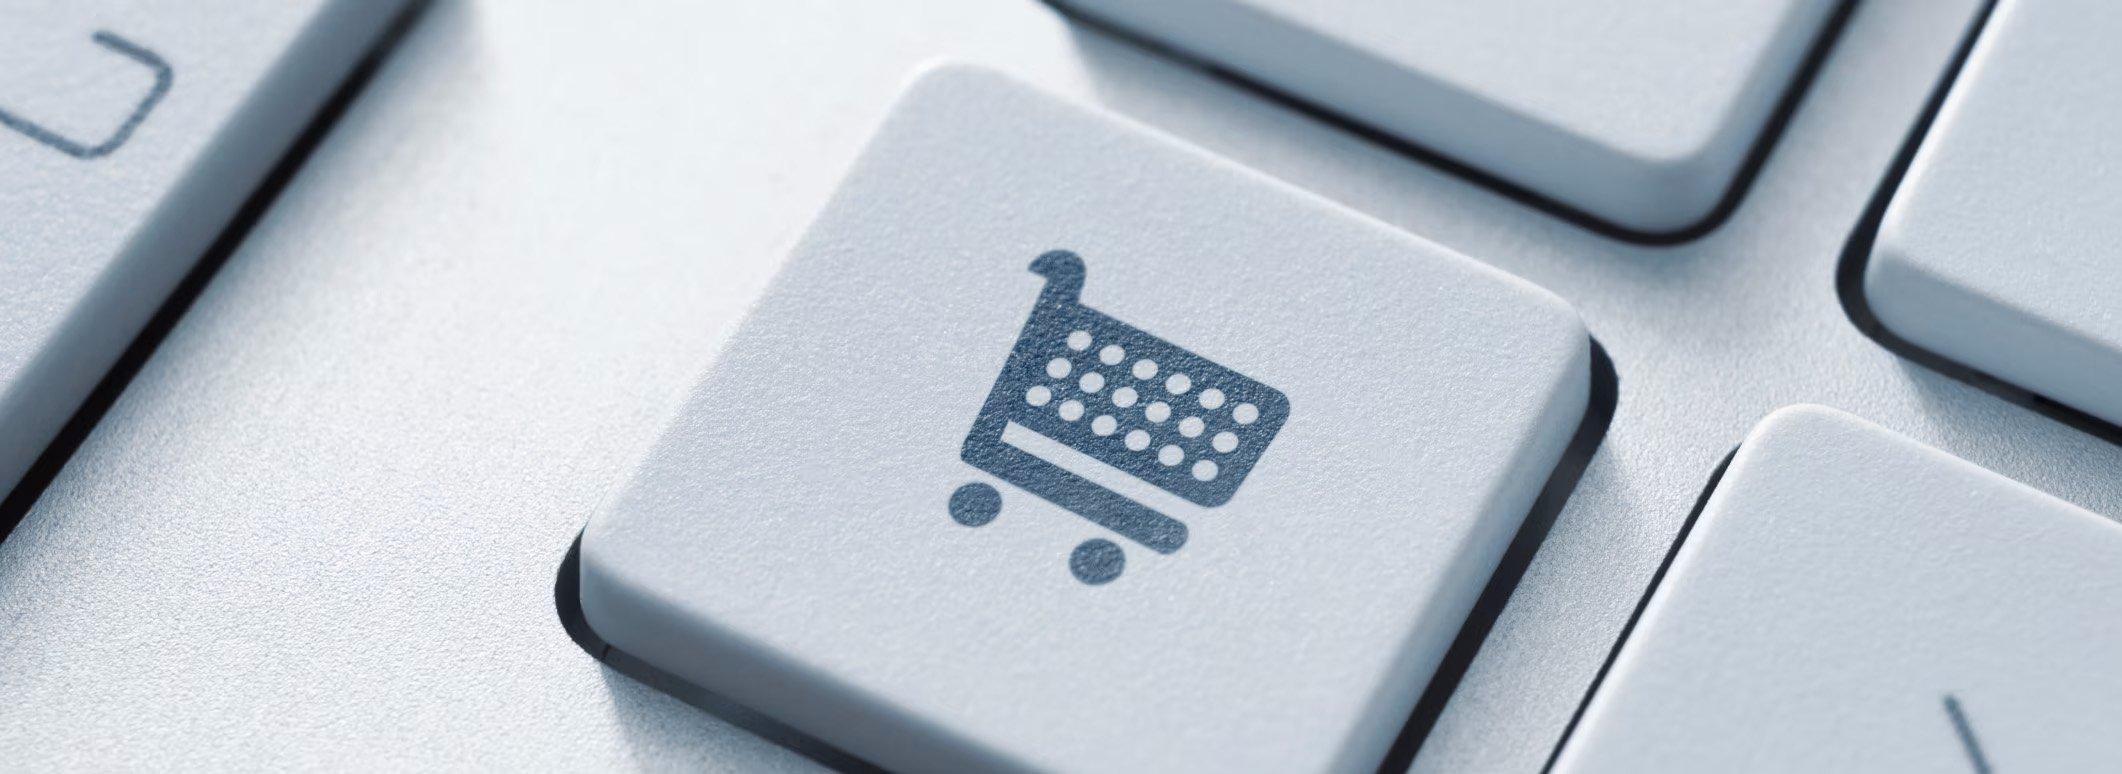 A button on a computer keyboard displays a shopping cart.